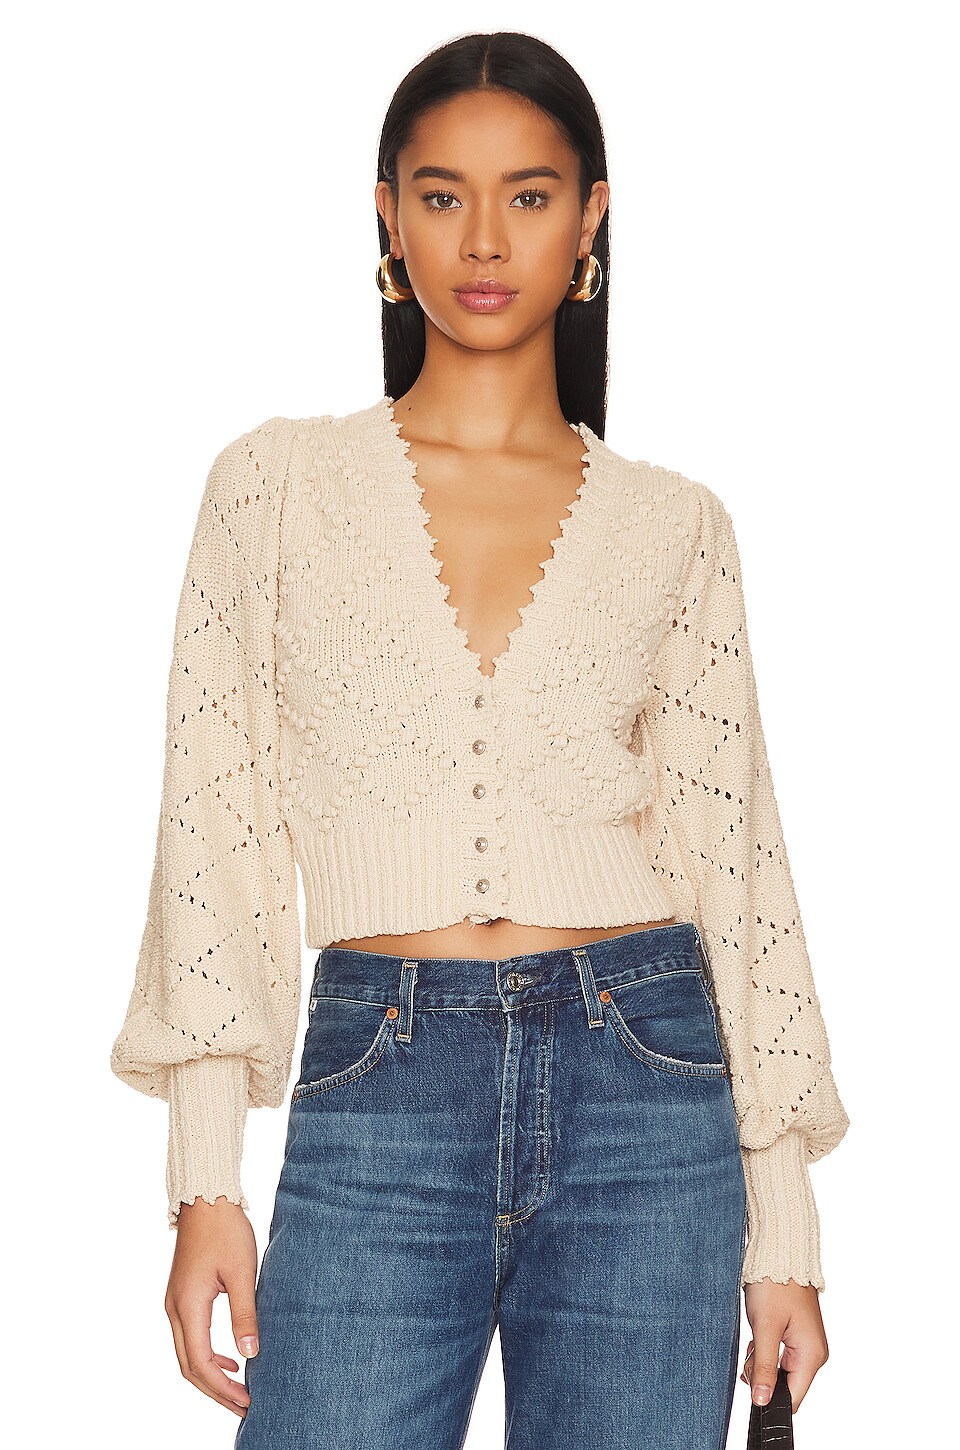 journalist bjerg Decode Free People Polly Sweater in Oatmeal | REVOLVE